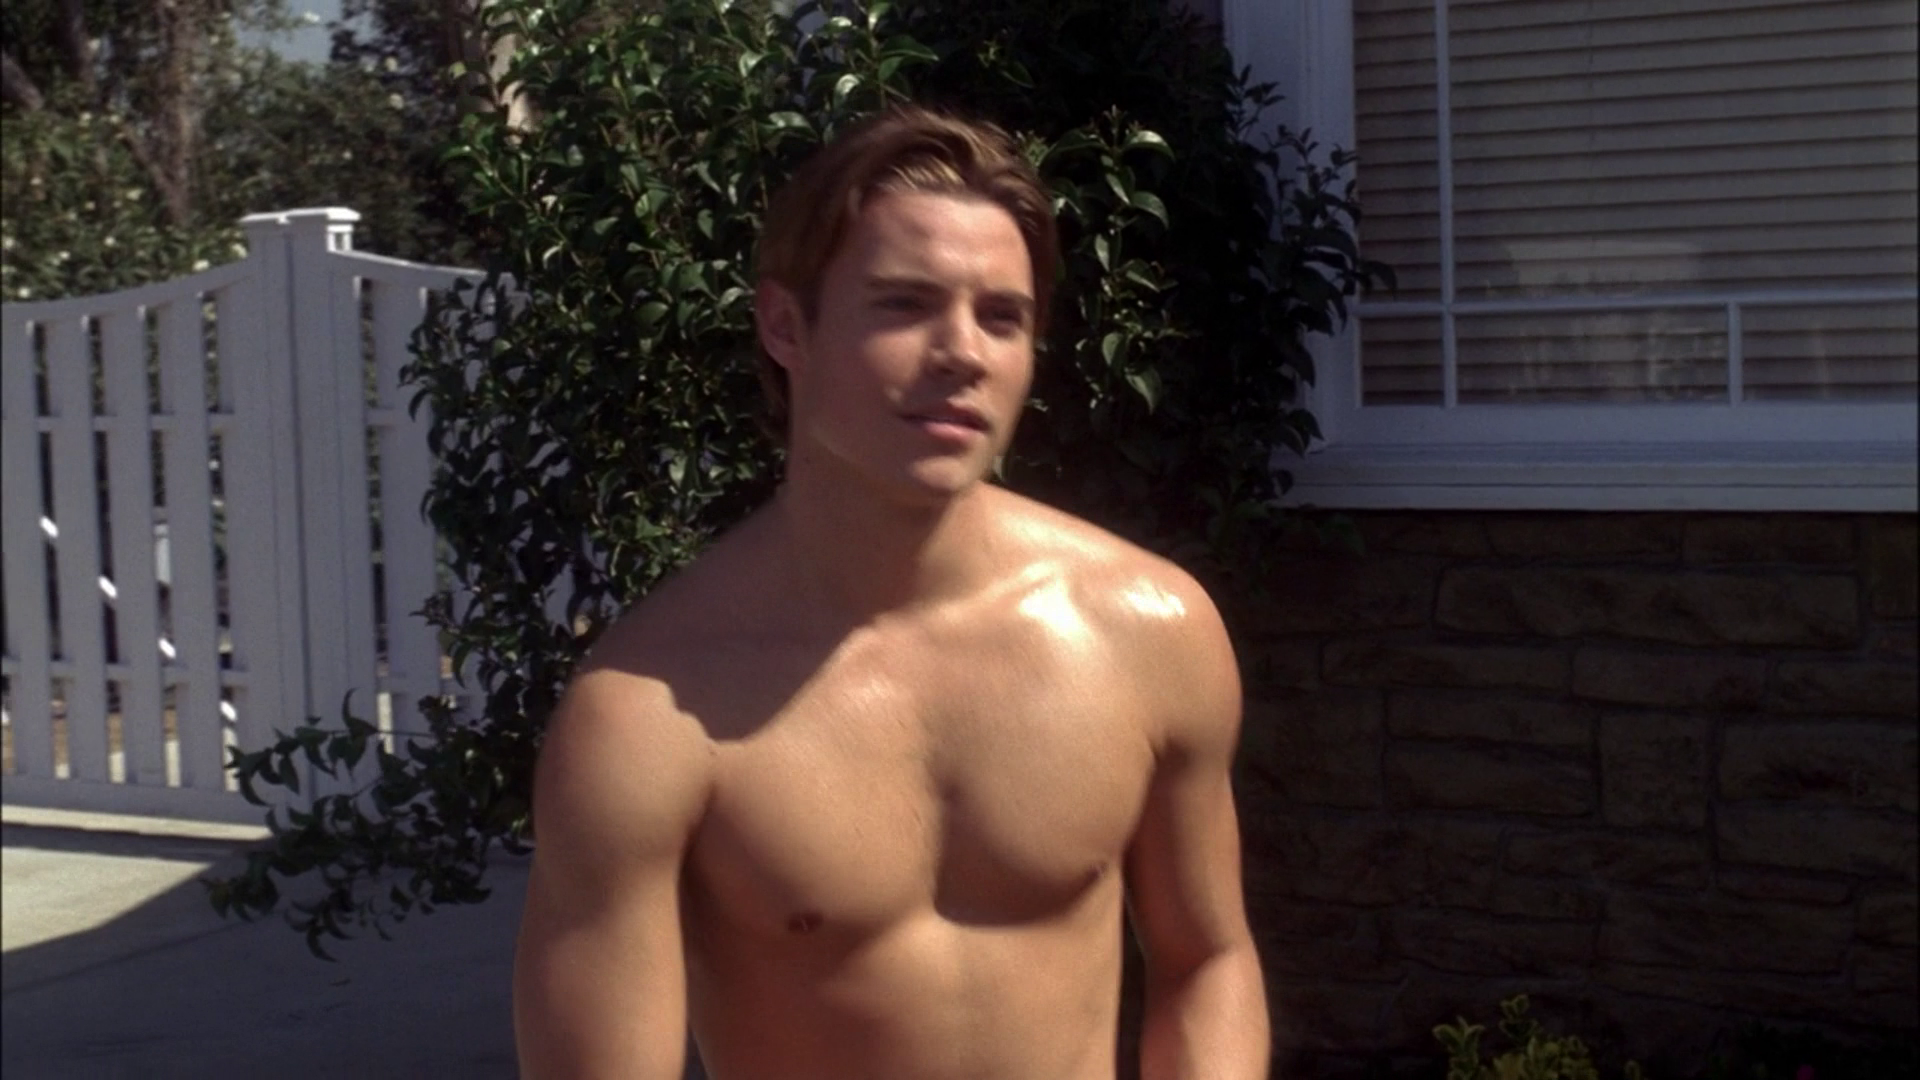 Josh Henderson shirtless in Desperate Housewives 3-02 "It Takes Two&qu...